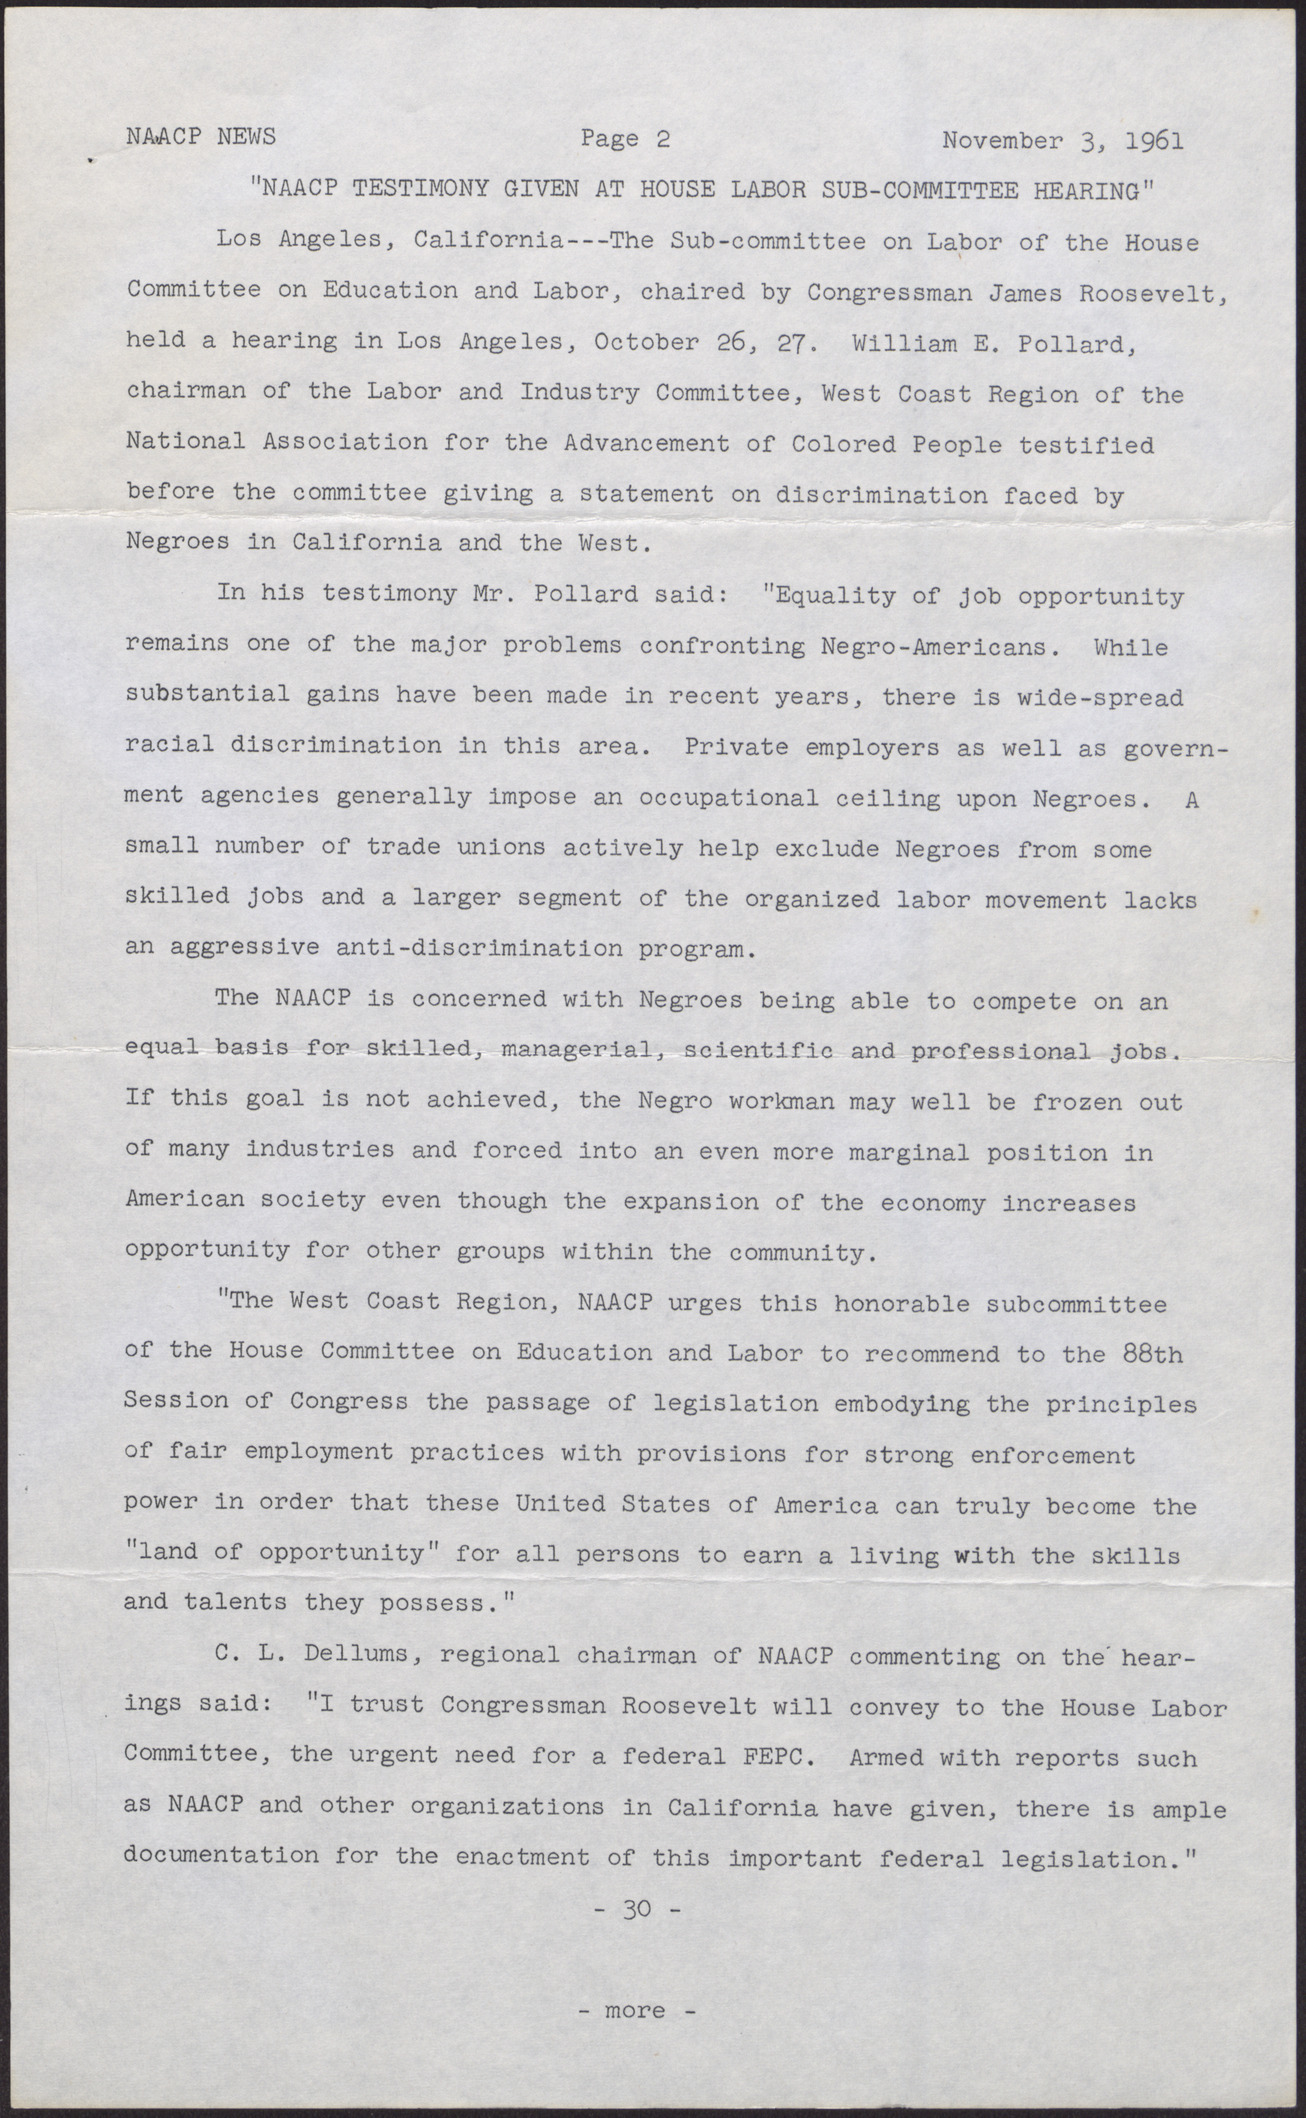 NAACP news letter (3 pages), November 3, 1961, page 2